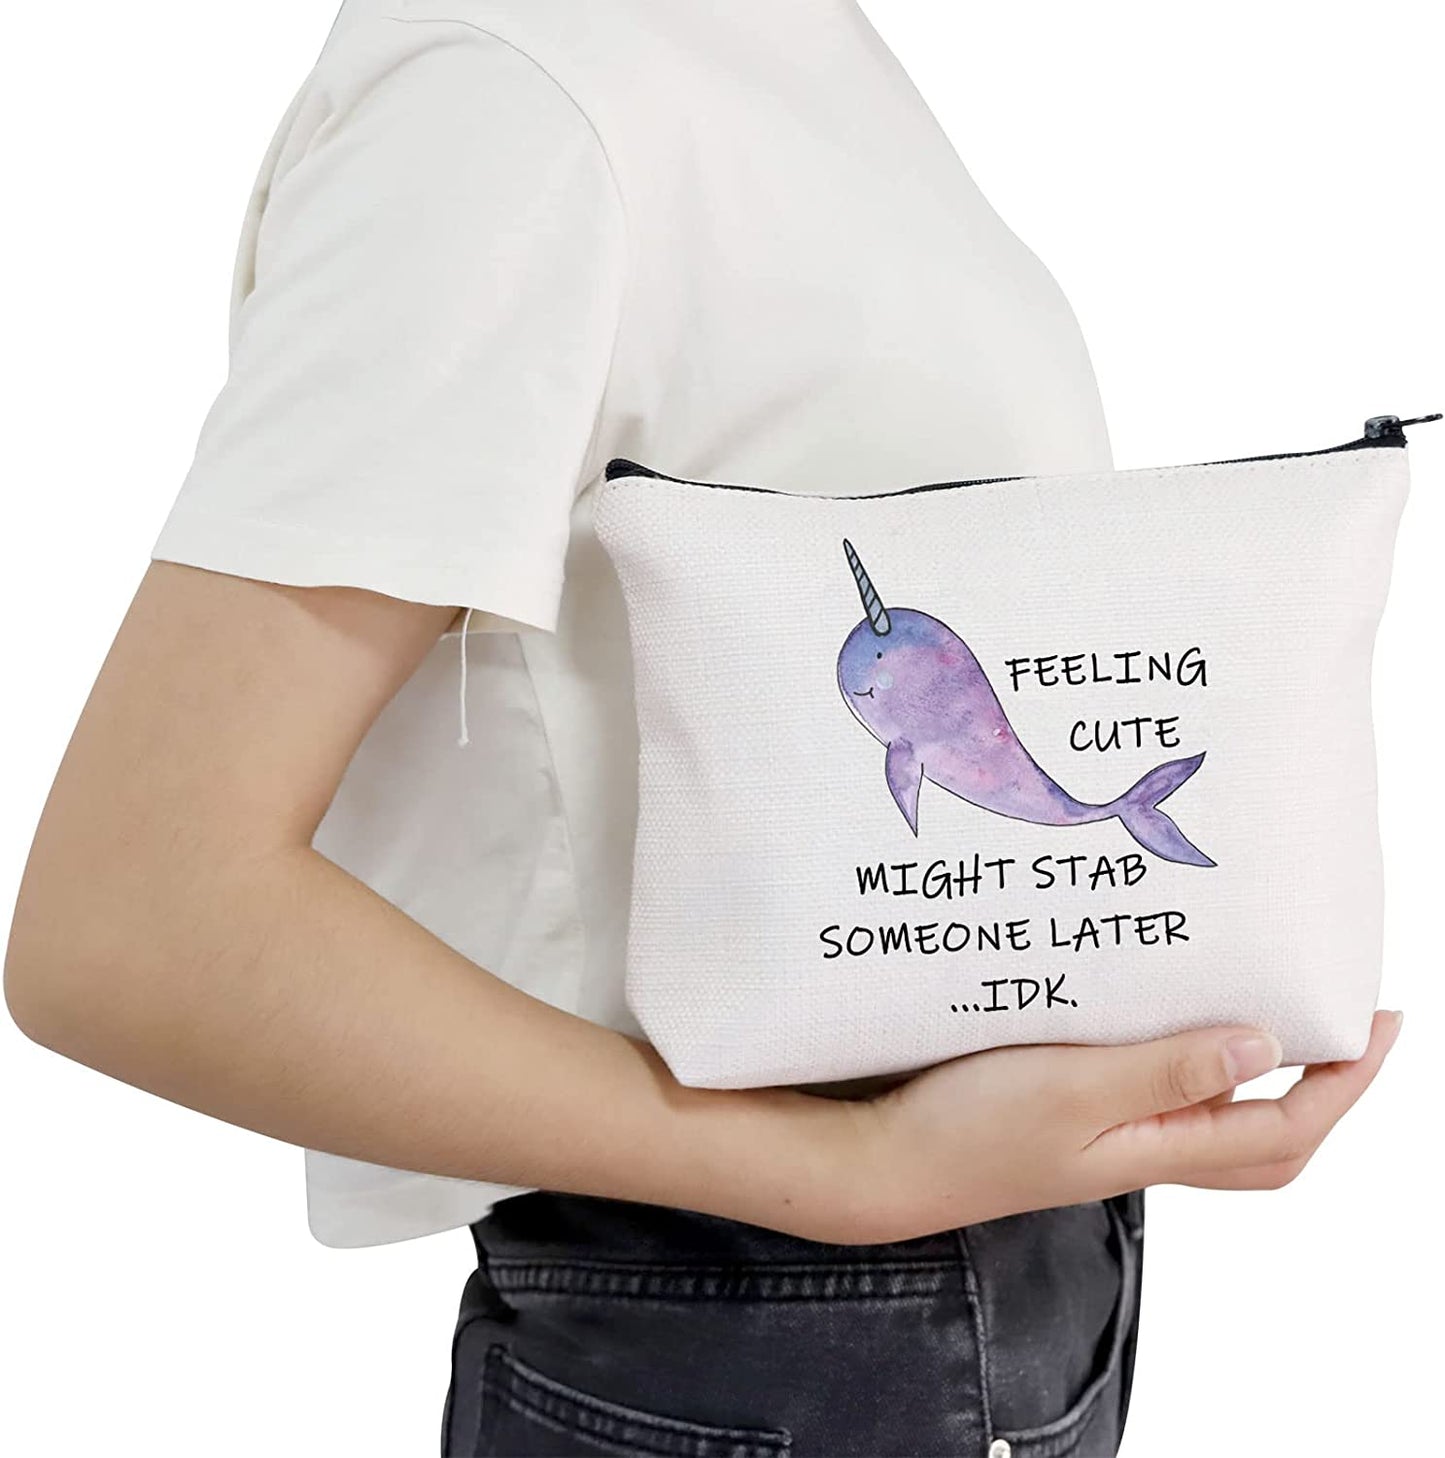 The perfect gift for your sassy friend who loves narwals.